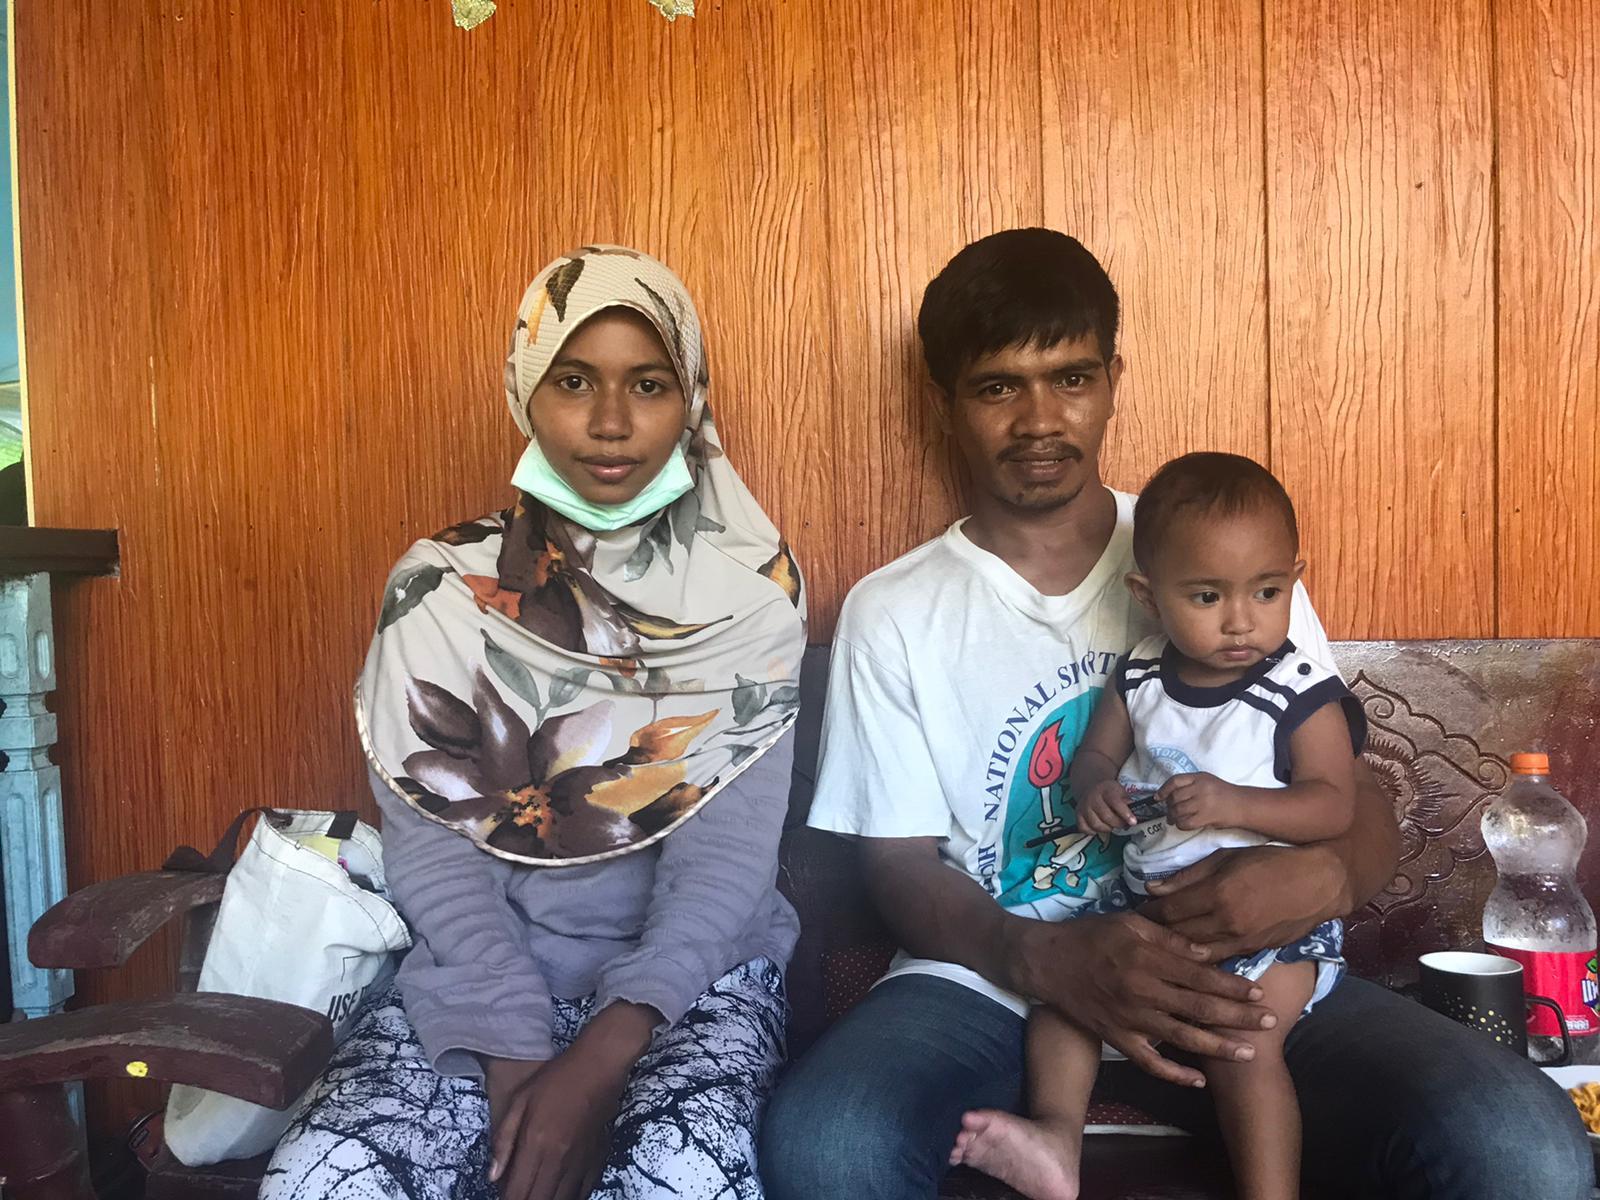 Nurhalisa Jehawee with her child and former husband. Nurhalisa now lives with her father and is eagerly awaiting the day when the Malaysia-Thailand border reopens so that she can begin working once more.